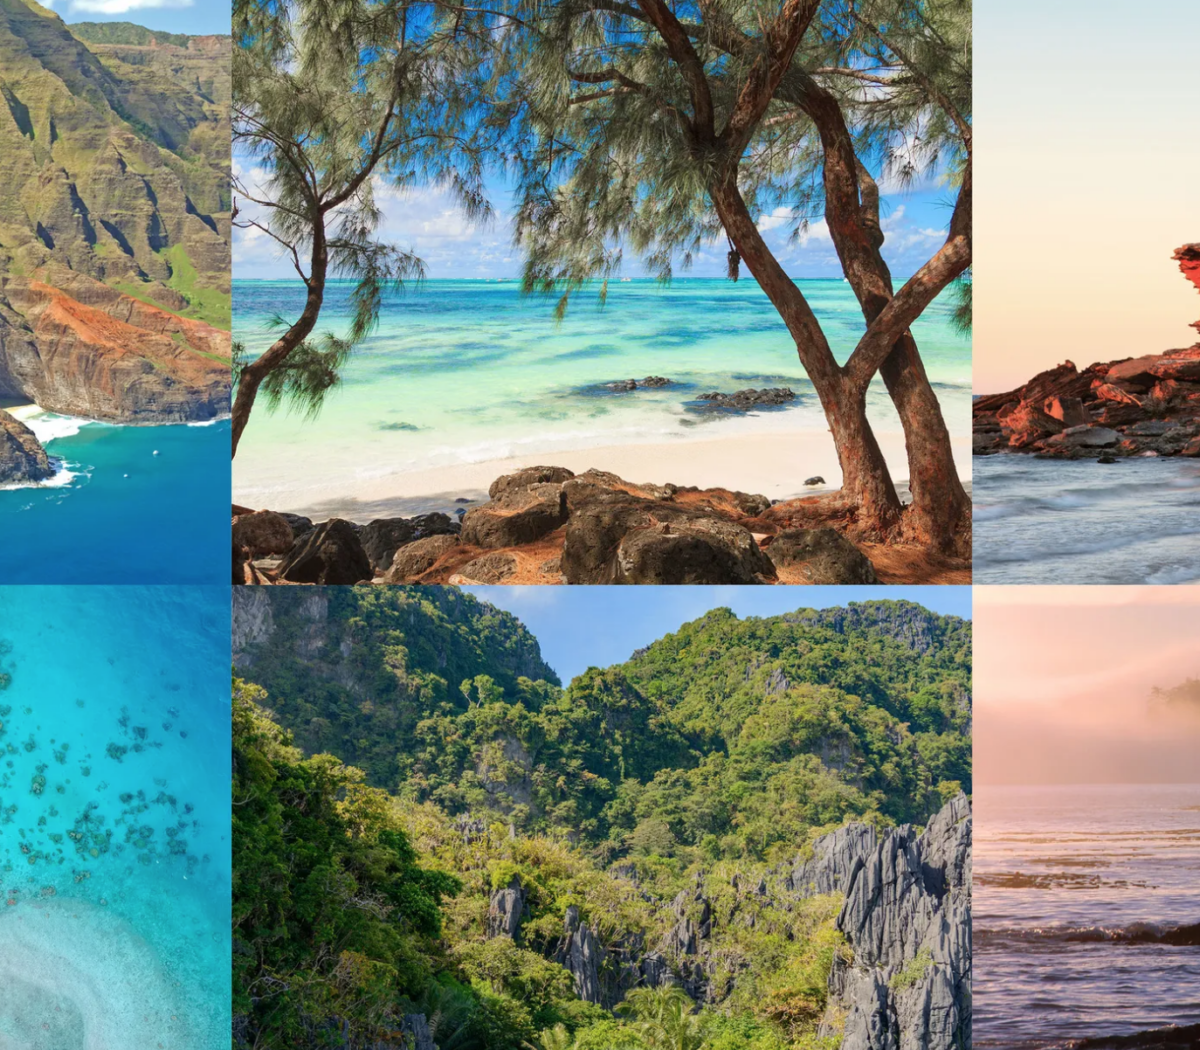 The 29 best beaches in the world